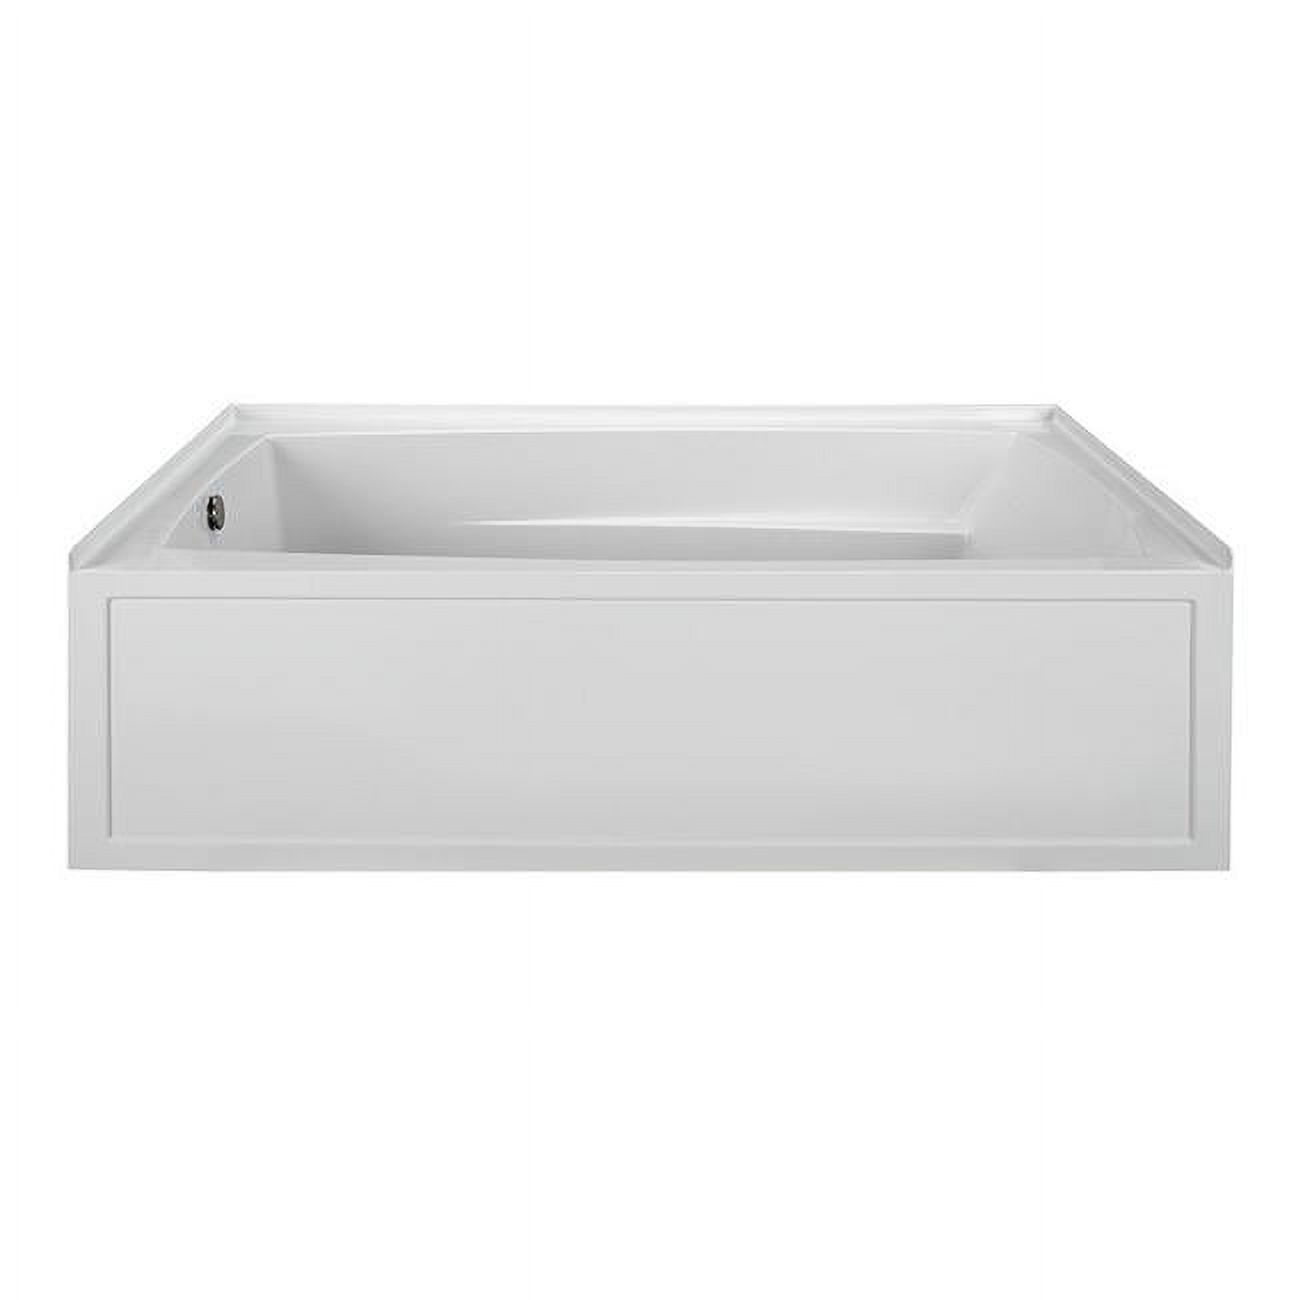 Integral Skirted End Drain Soaking Bath, Biscuit - 72 x 42 x 21 in. - Right Hand - image 1 of 1